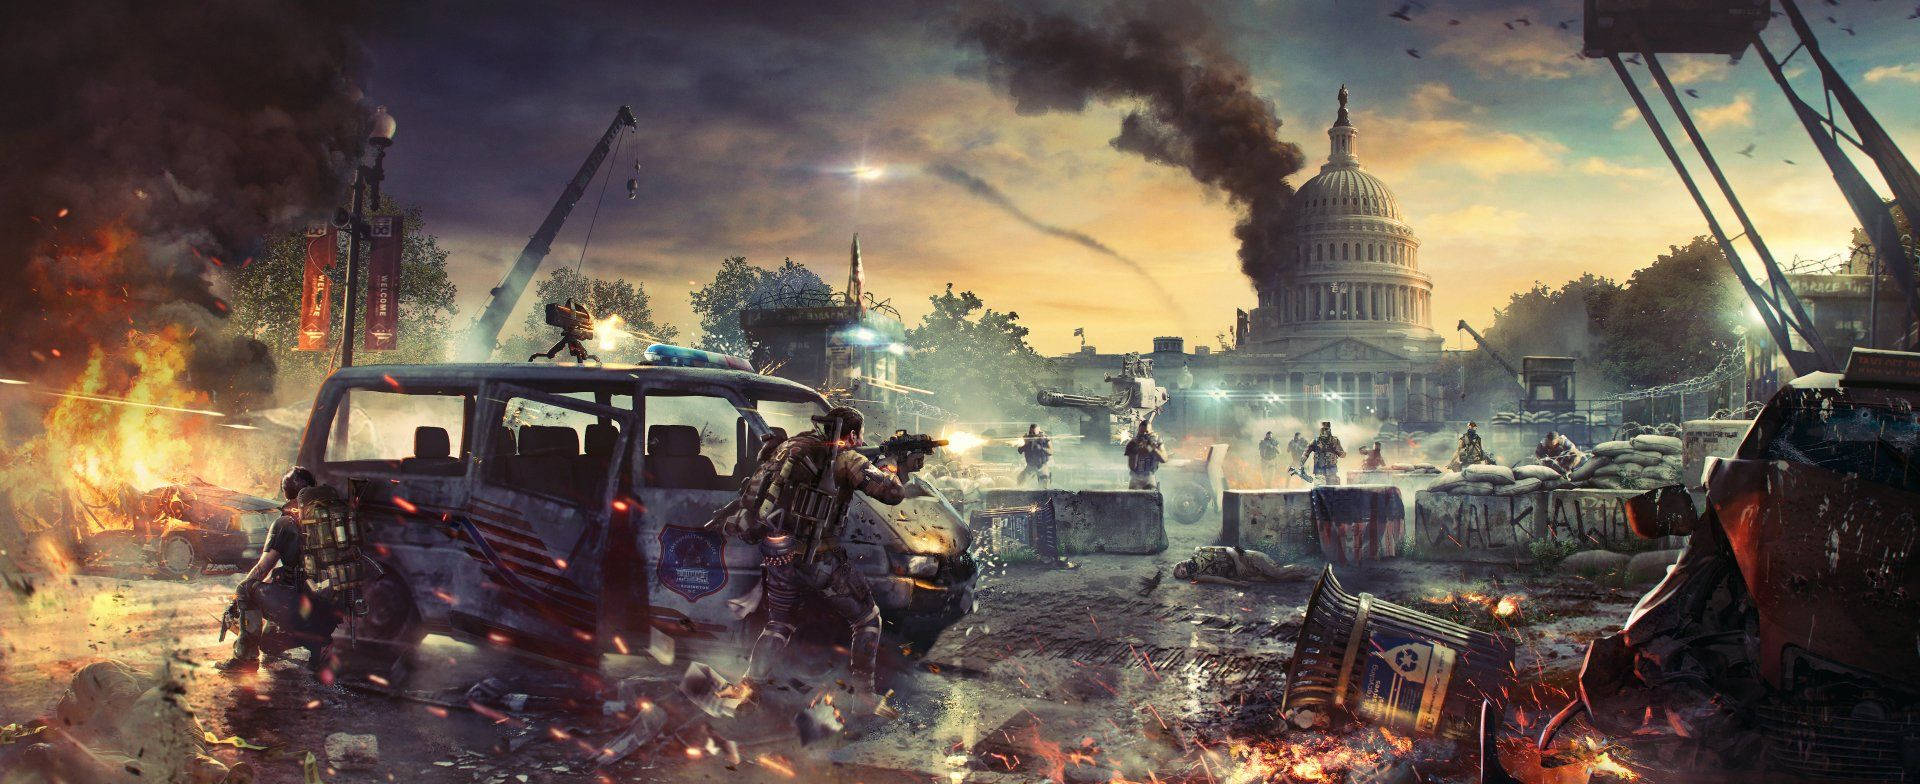 Top 999+ The Division 2 Wallpaper Full HD, 4K✅Free to Use